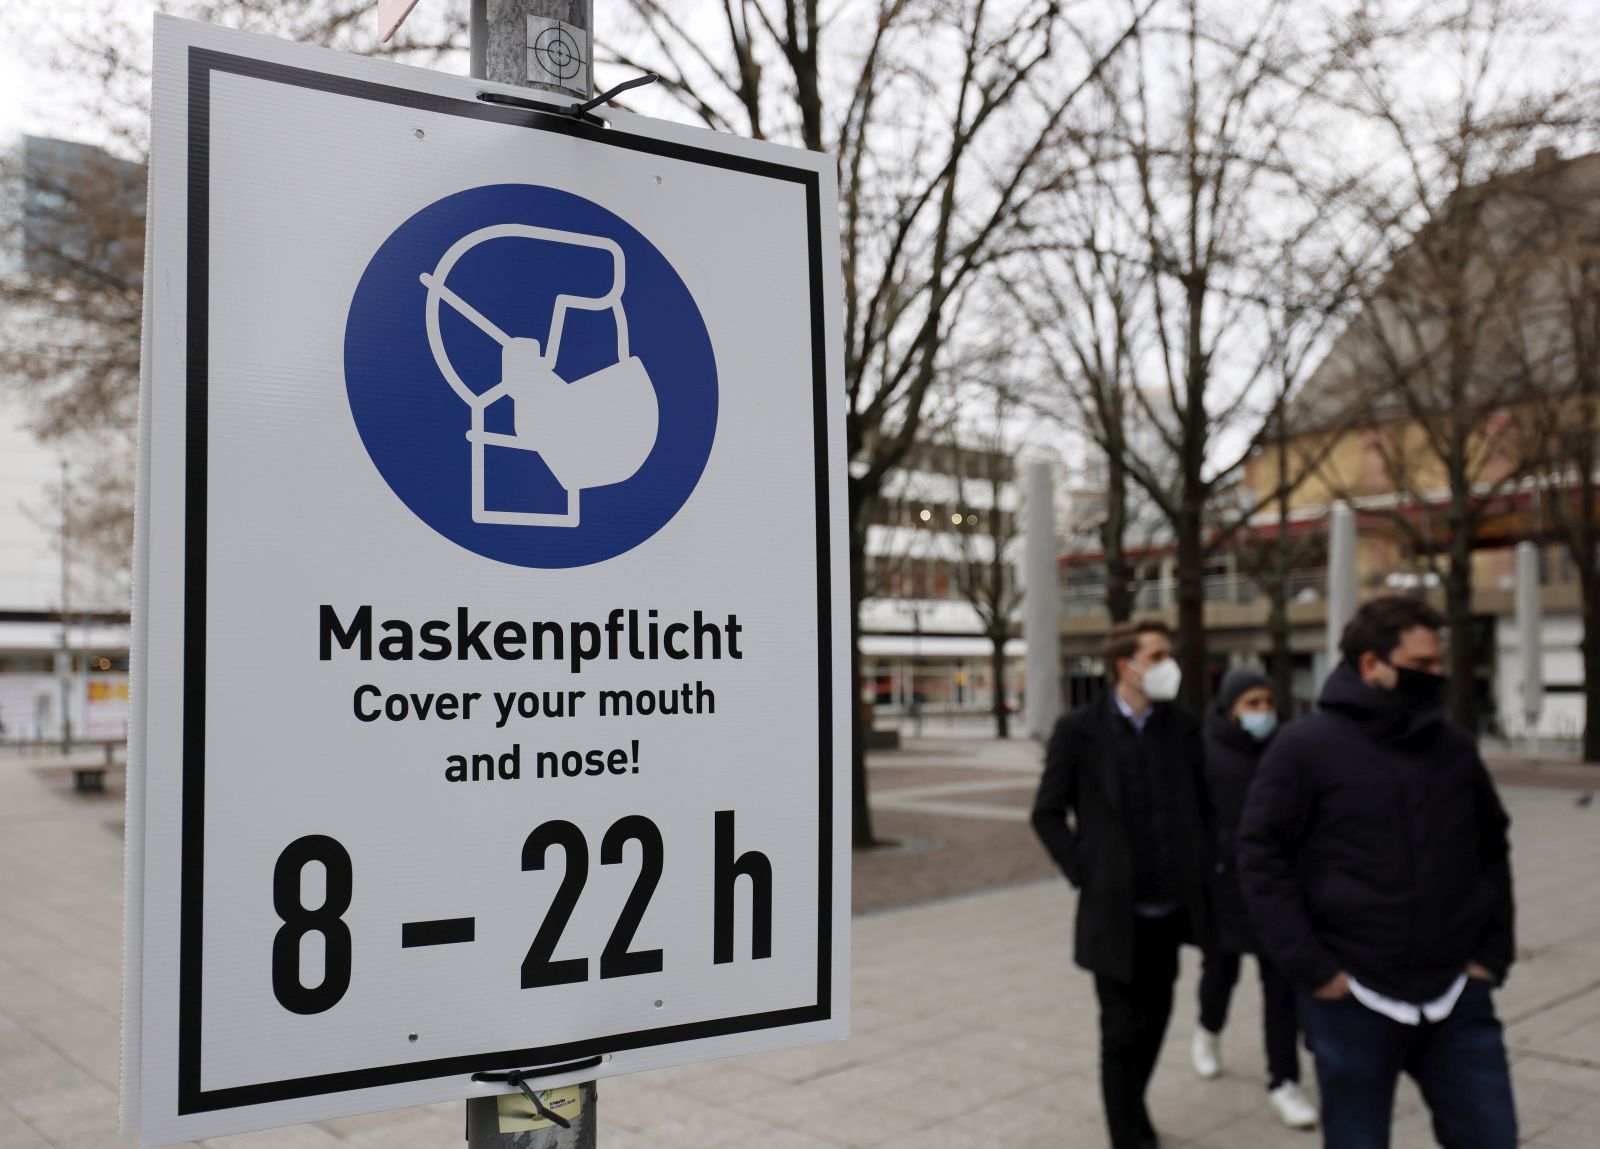 epa08937088 A sign demands wearing face masks at the shopping street 'Zeil' in Frankfurt am Main, Germany, 14 January 2021. Due to an increasing number of cases of the COVID-19 pandemic caused by the SARS CoV-2 coronavirus, nationwide restrictions have been introduced to counteract a rise in infections.  EPA/RONALD WITTEK